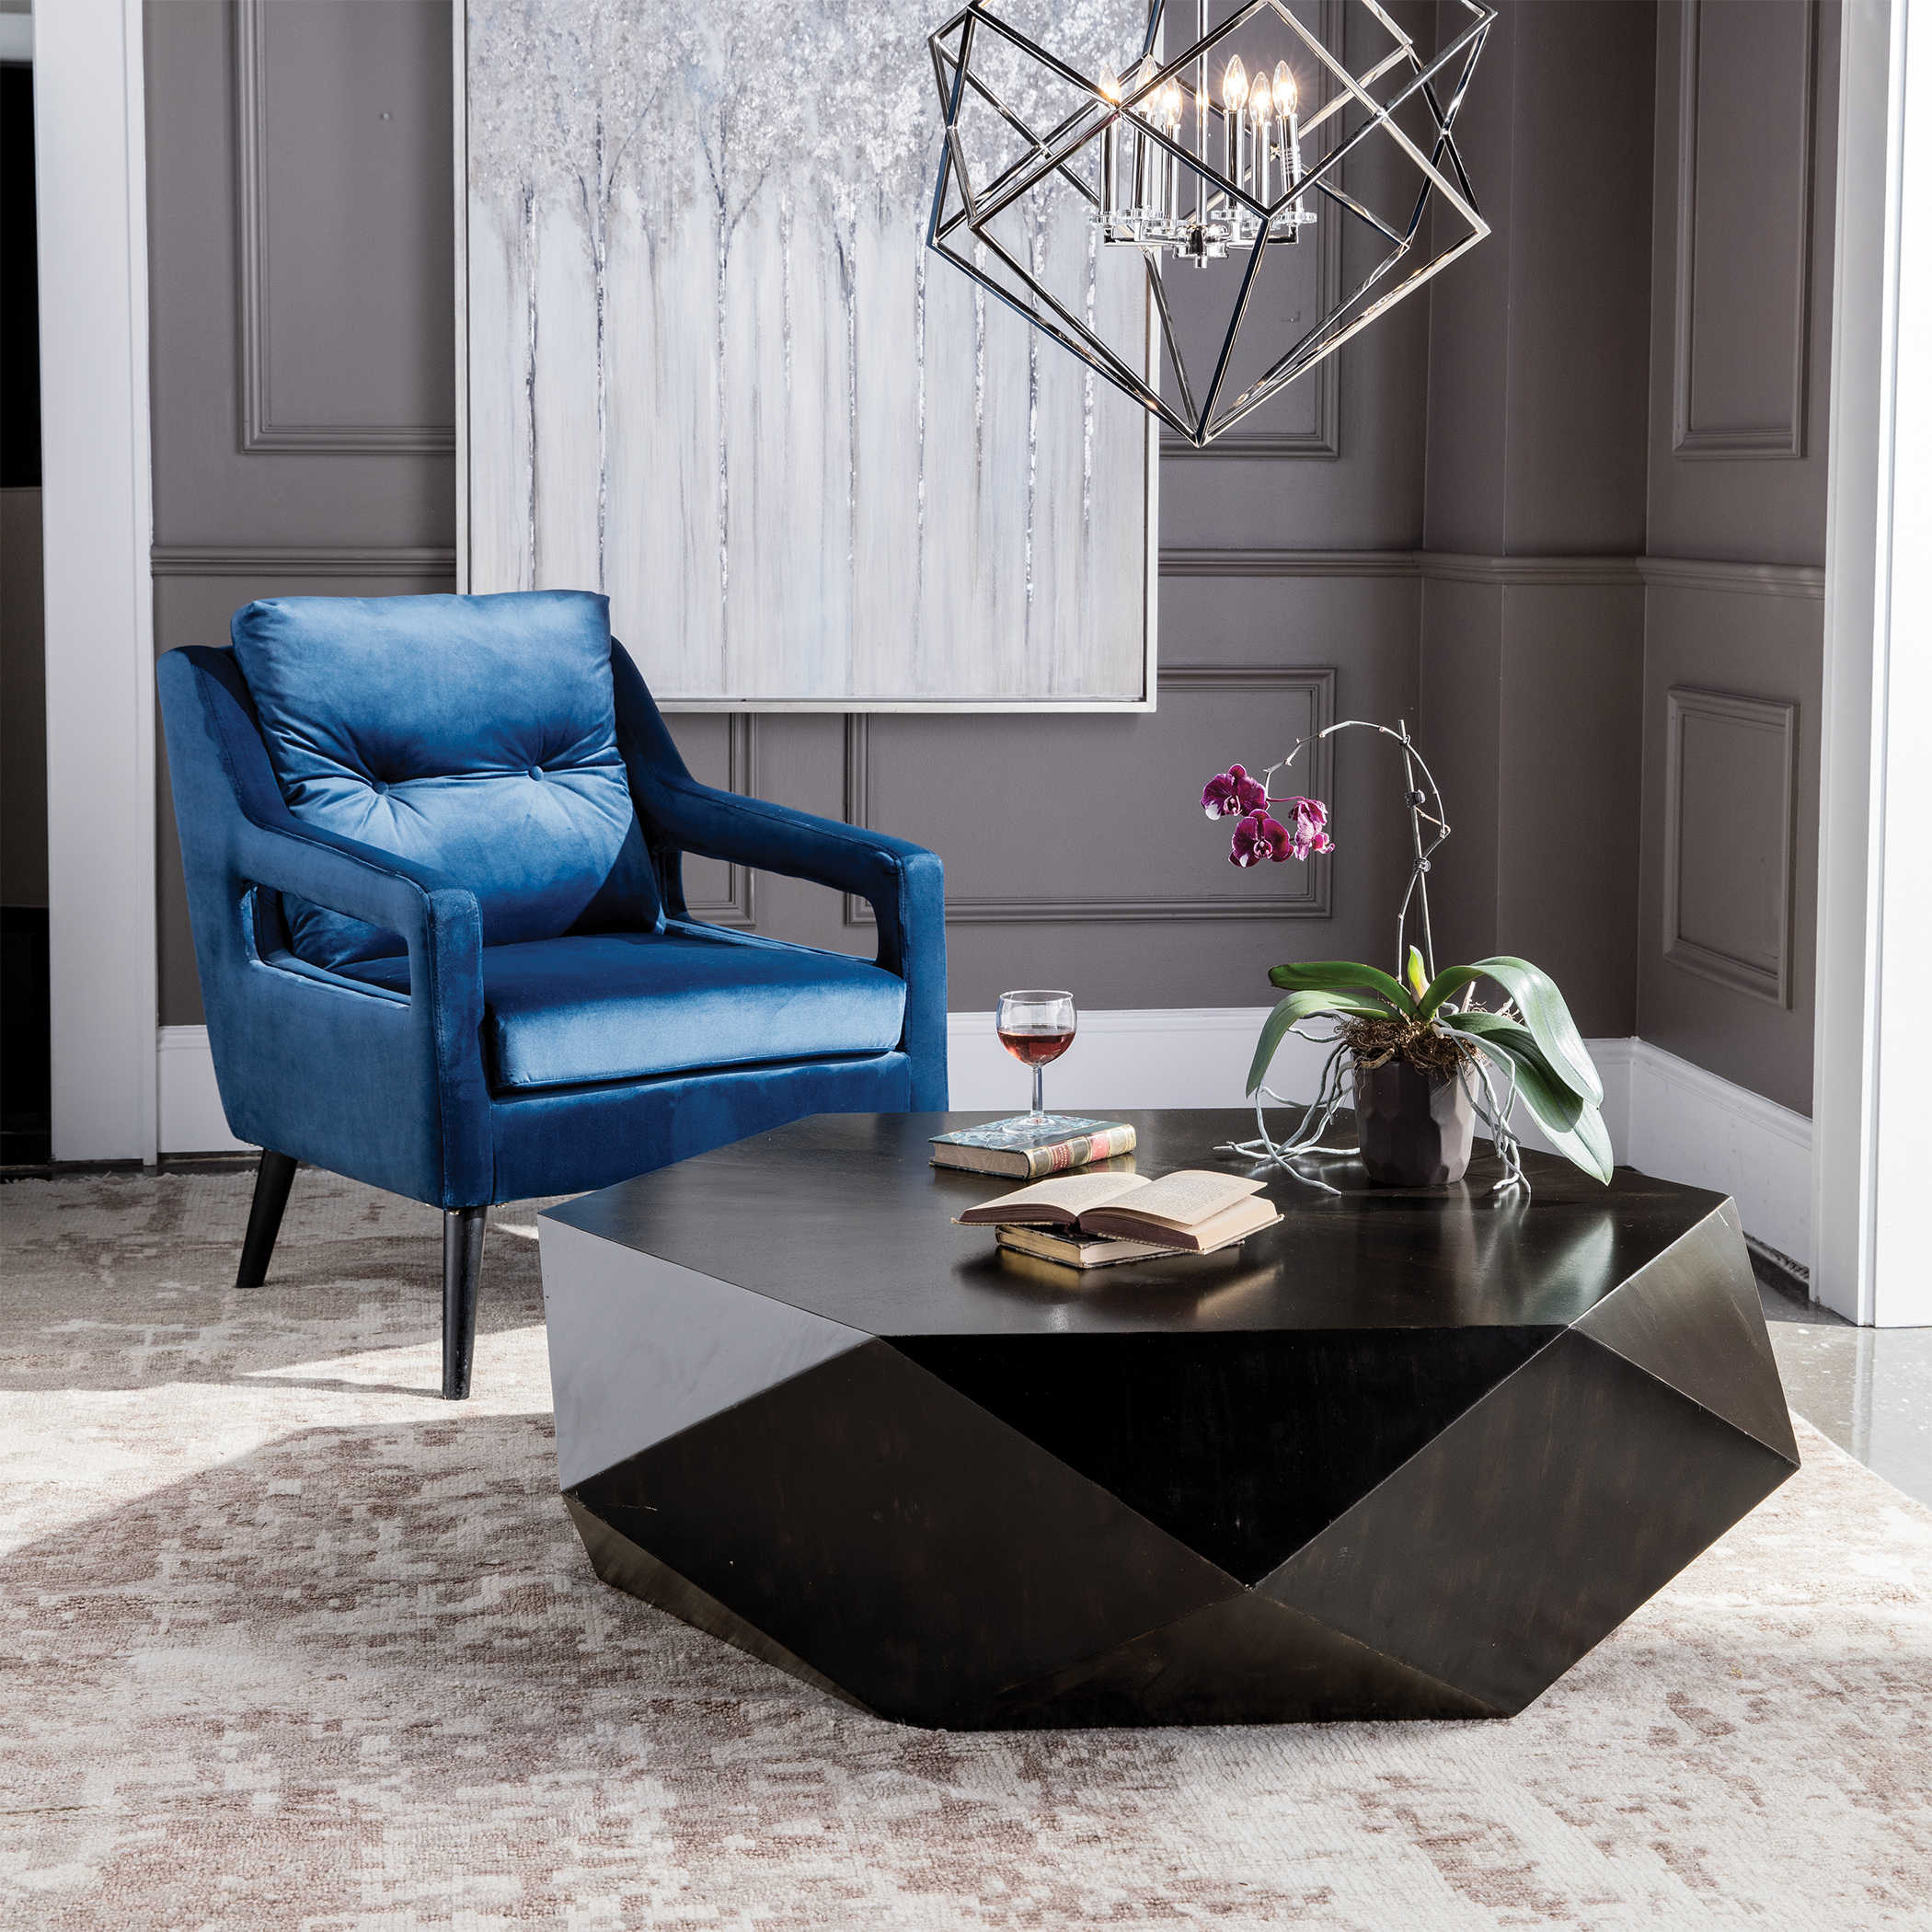 Check out our modern table decor selection for the very best in unique accent tables, coffee tables, end tables, and console tables.